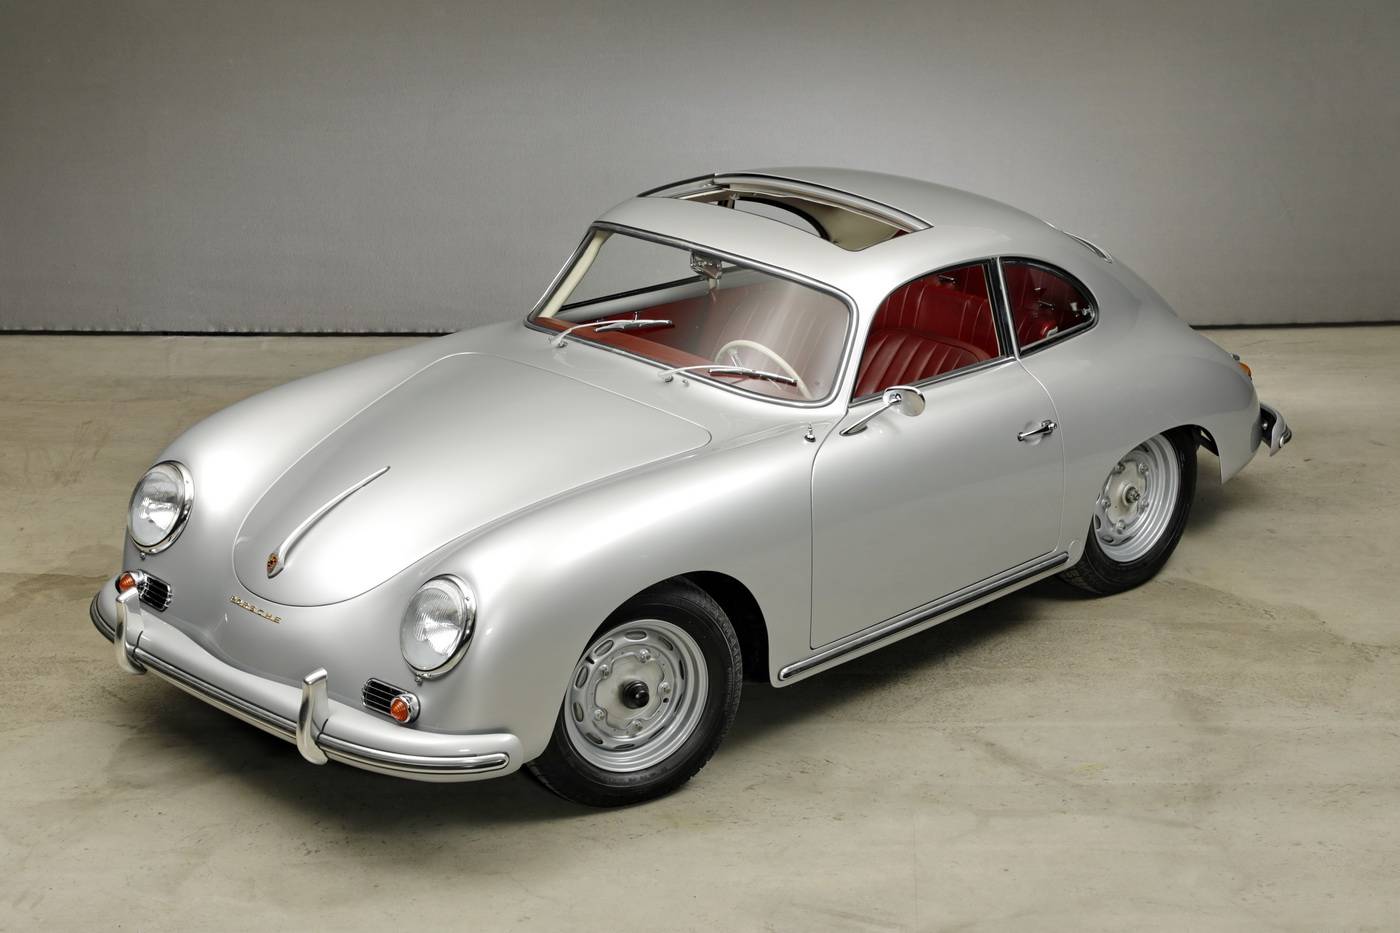 For Sale: Porsche 356 A 1600 S (1958) offered for $285,460